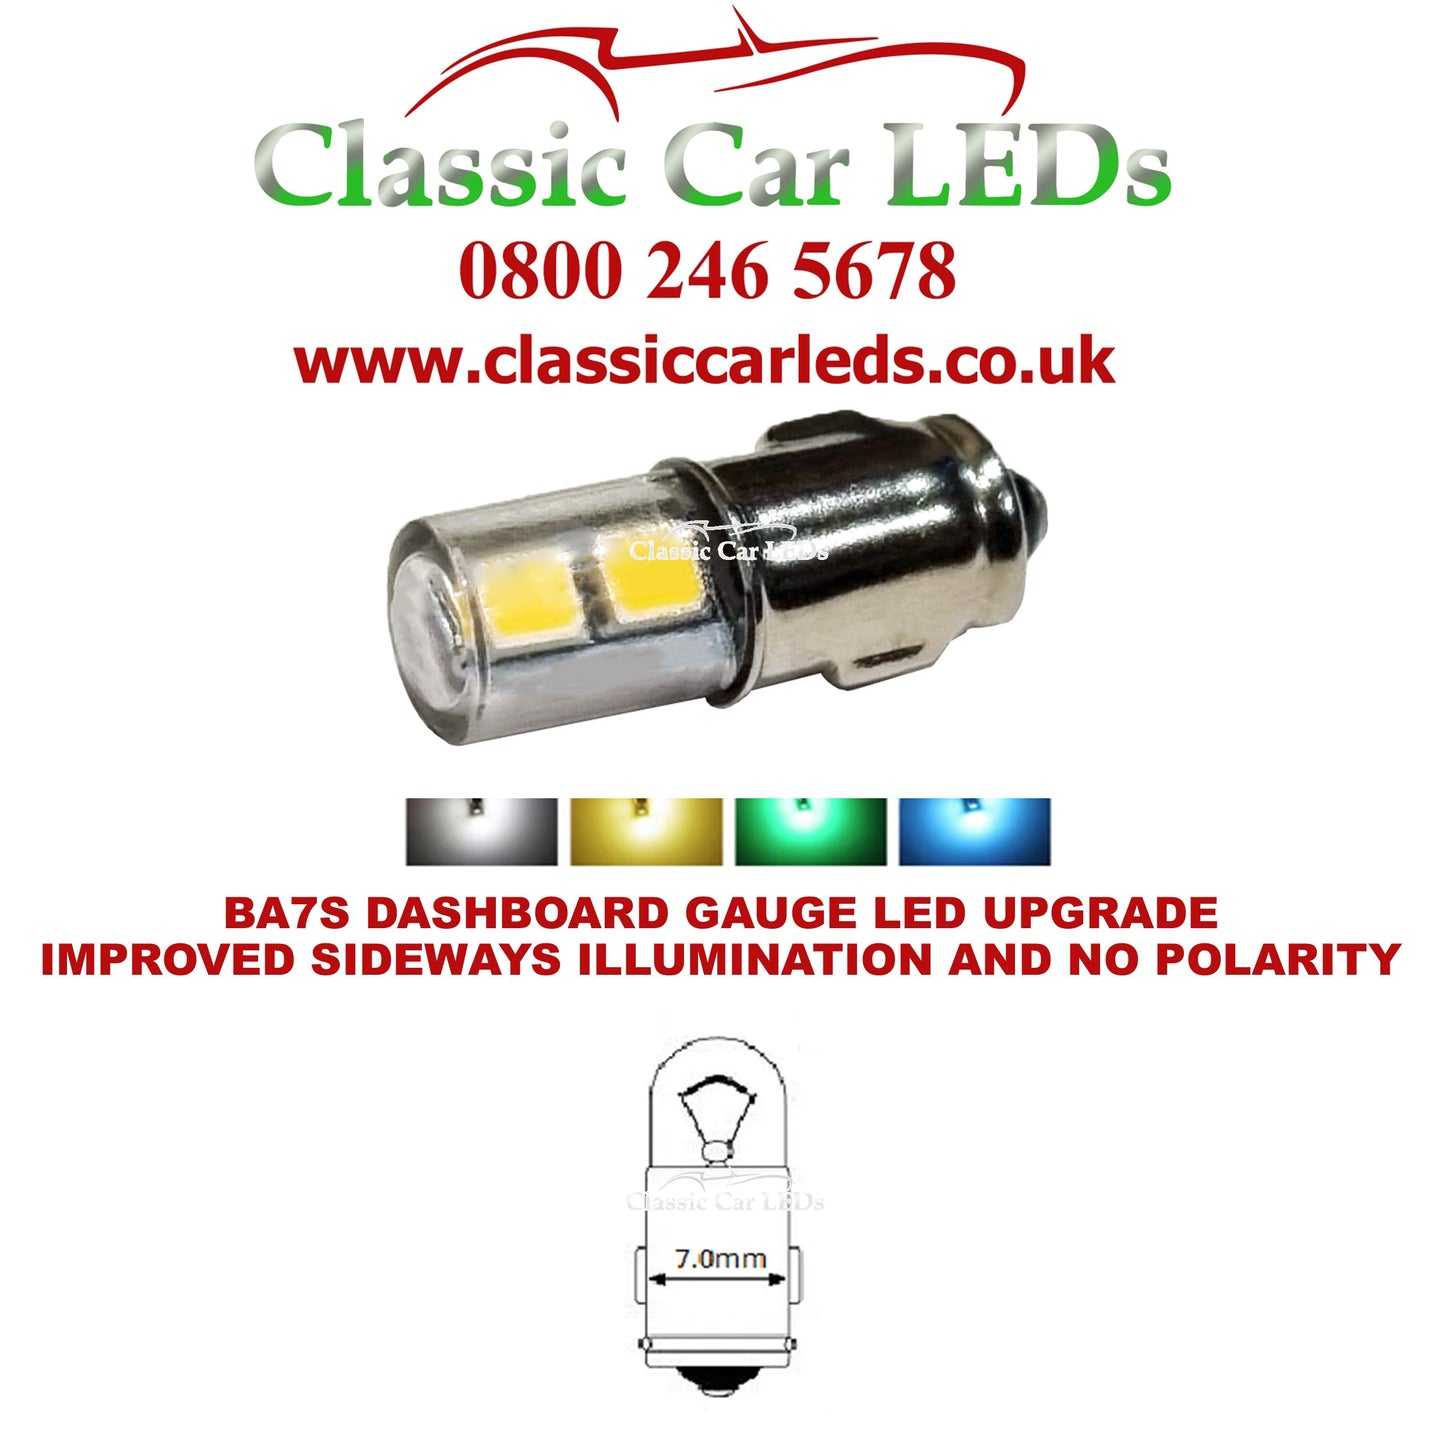 BA7S 281 MCC LED DASHBOARD WARNING SWITCH BULB - VARIOUS COLOURS